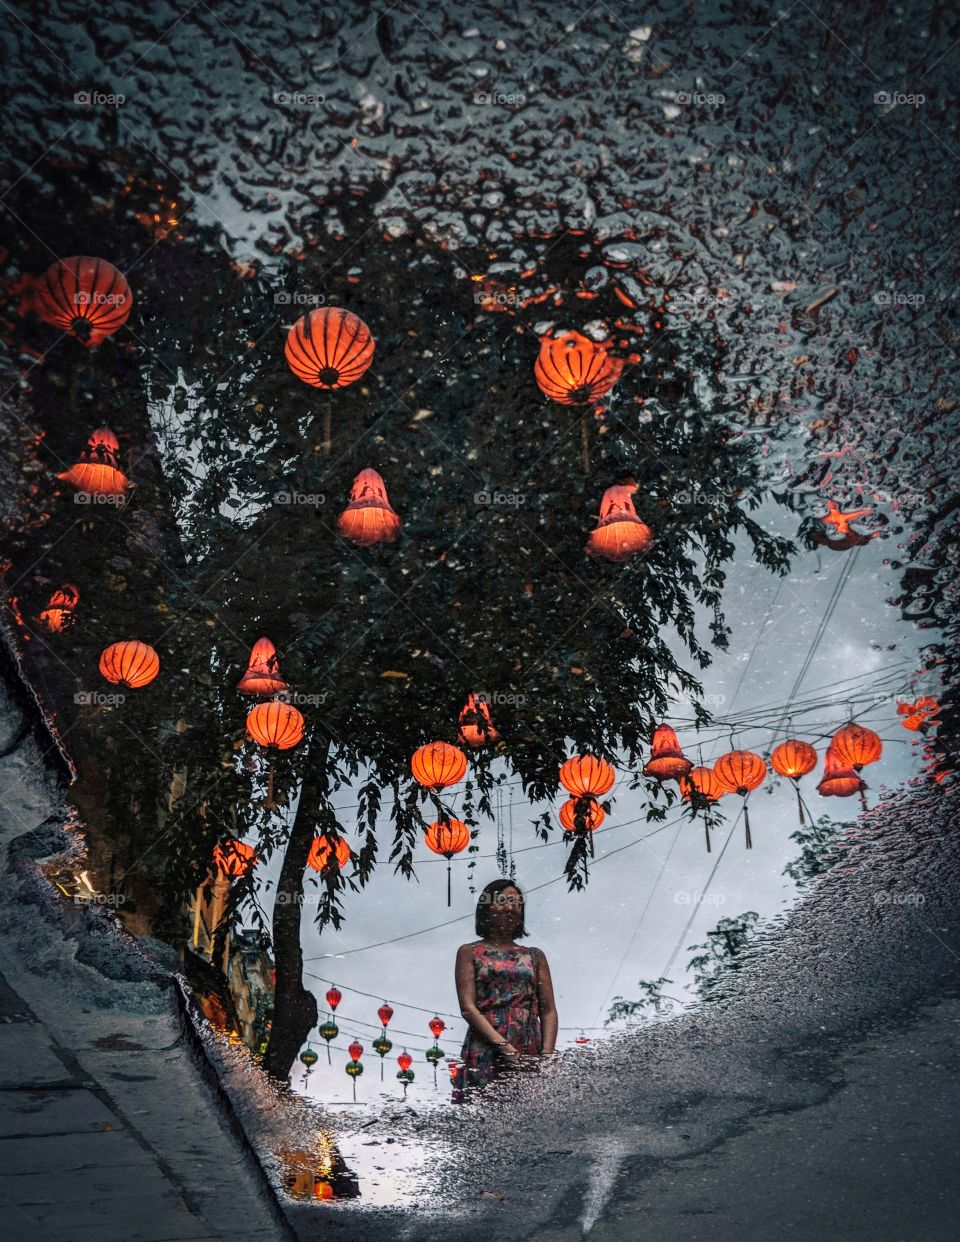 Red hanging lanterns and a girl reflected in a puddle of water